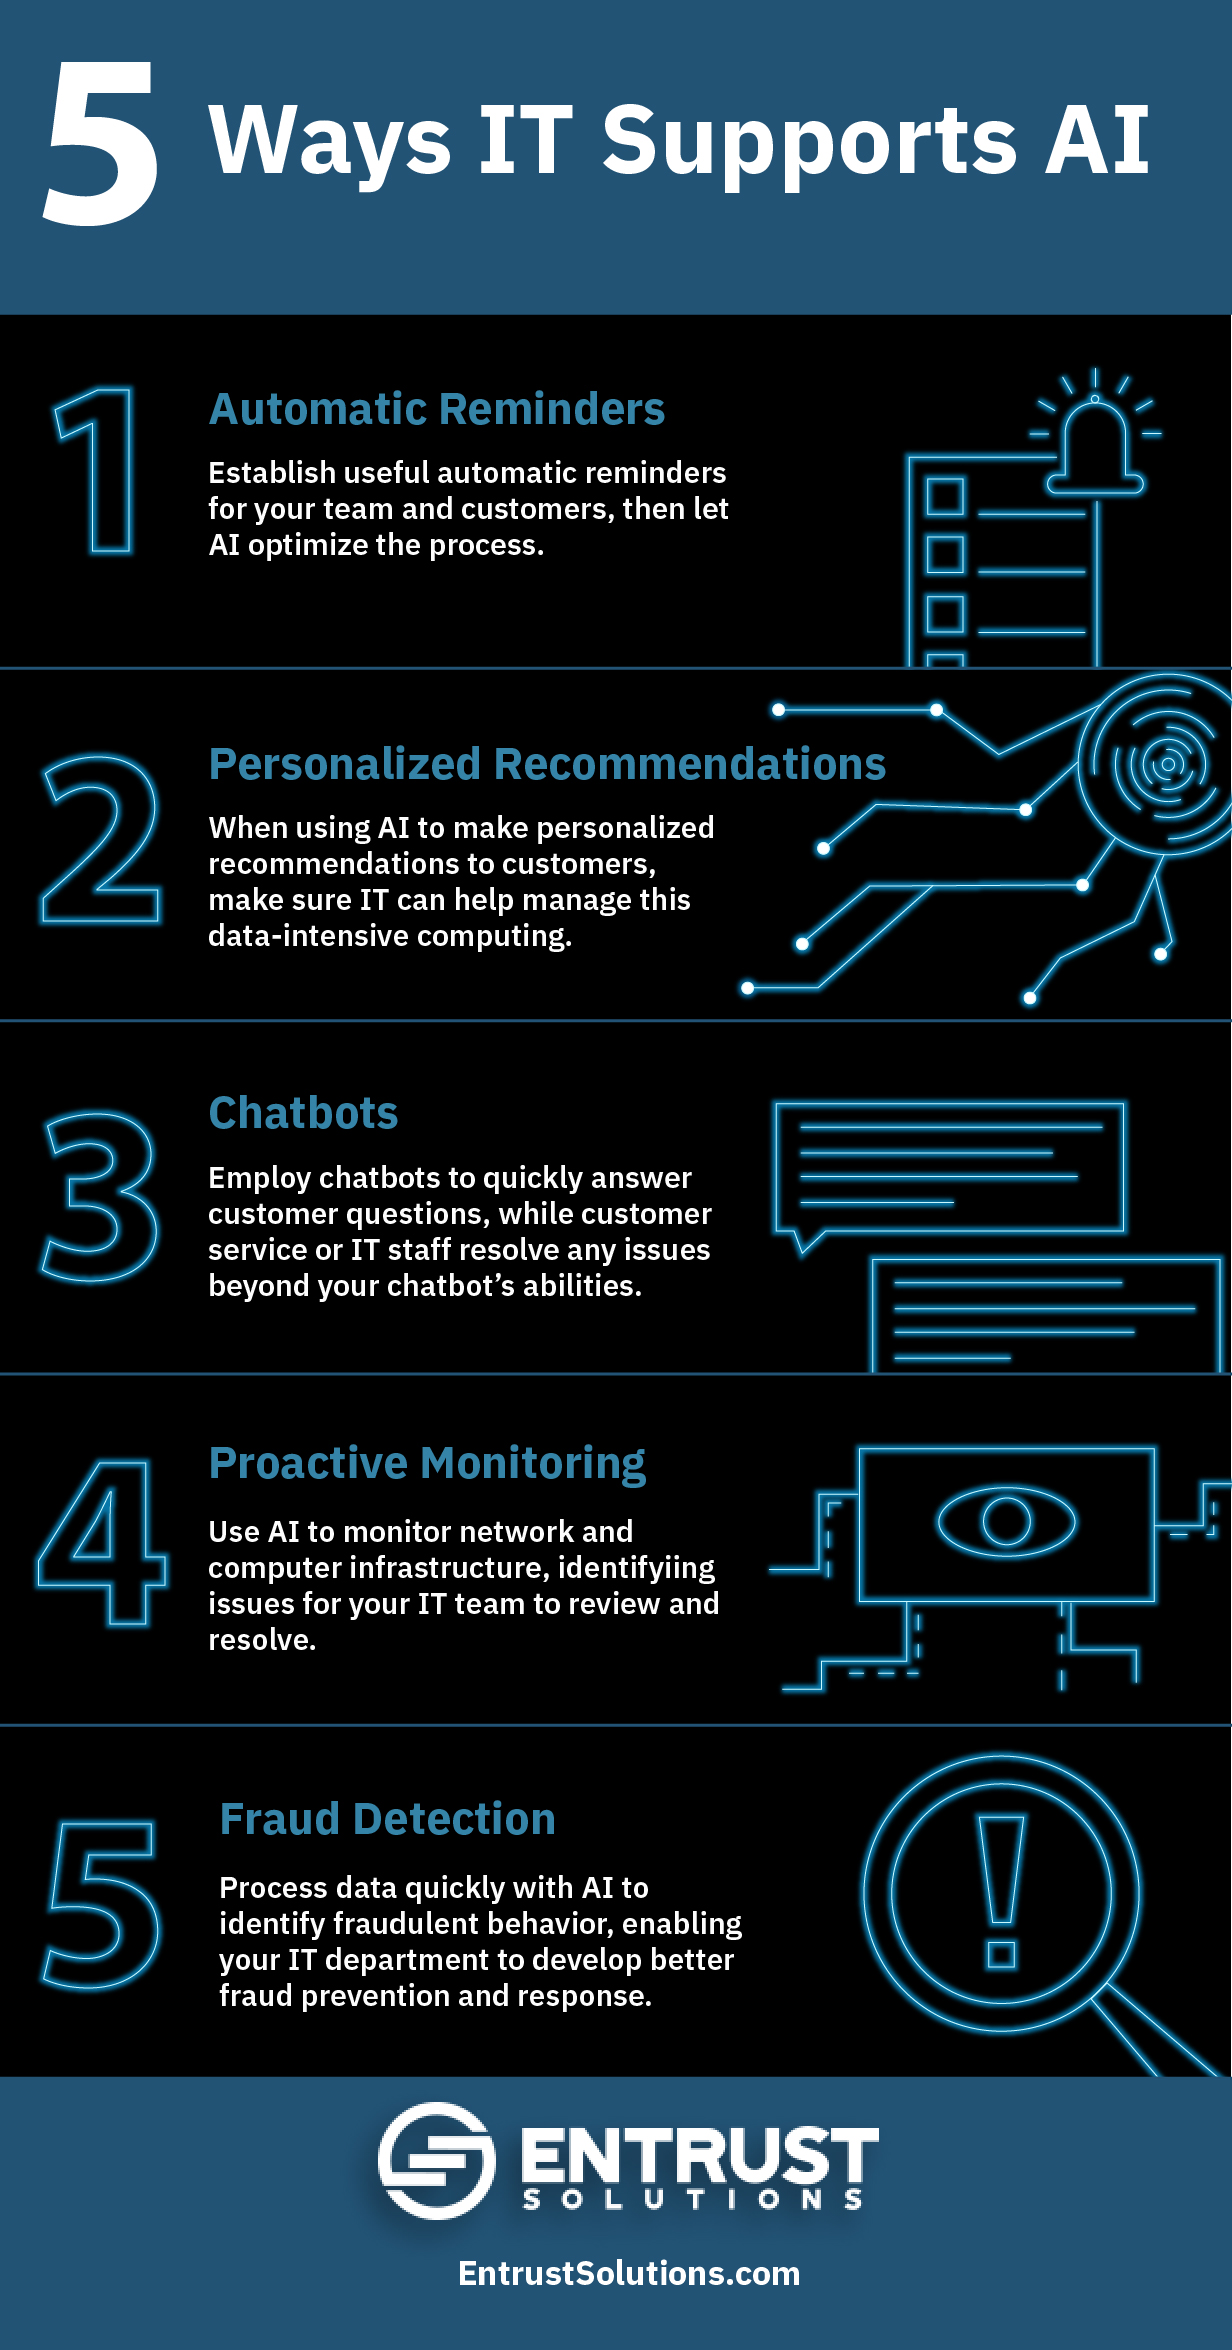 An infographic explaining 5 ways how information technology supports artificial intelligence.